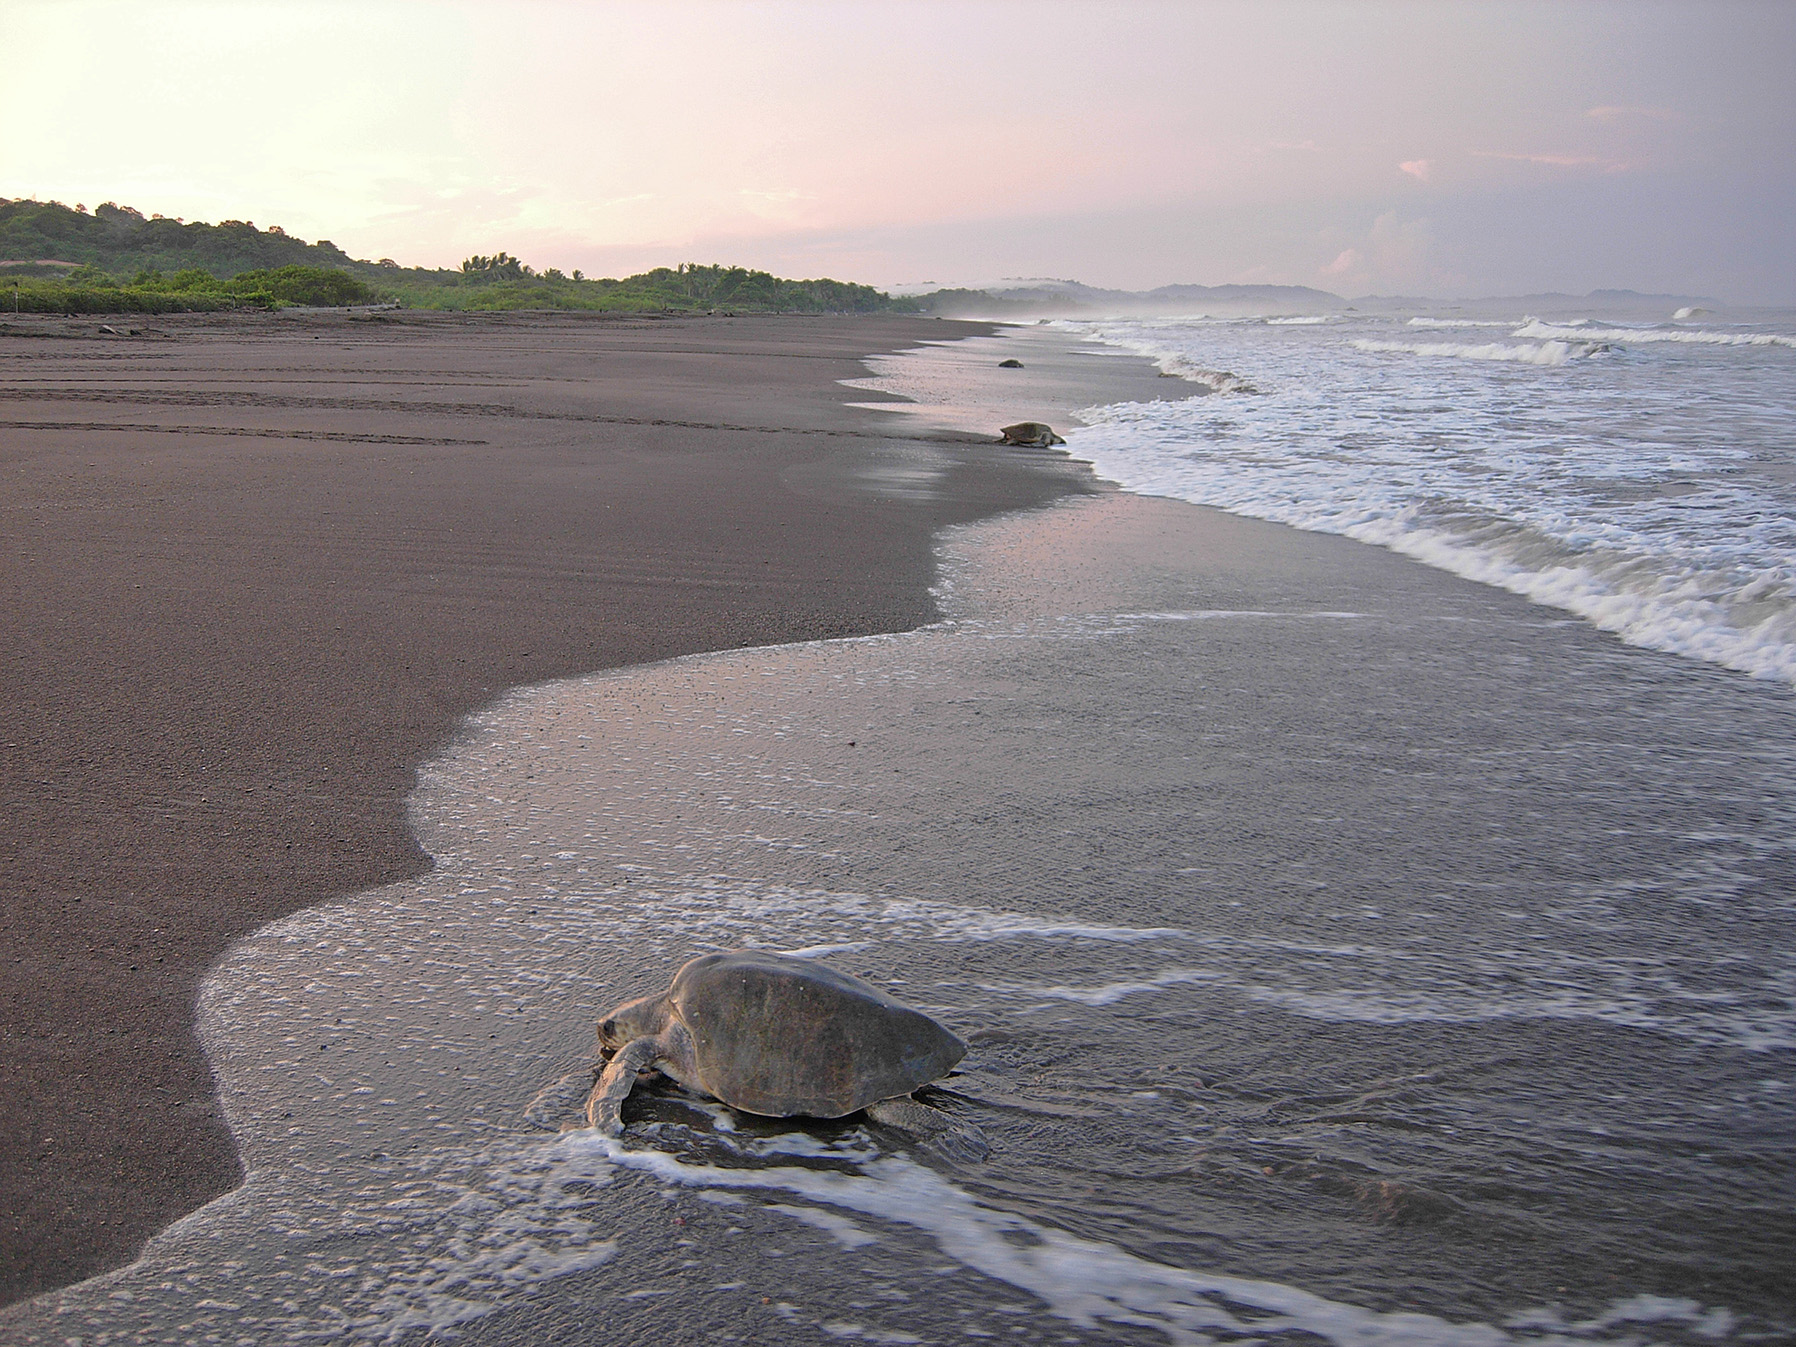 Several female specimens of the Olive ridley sea turtle (Lepidoc